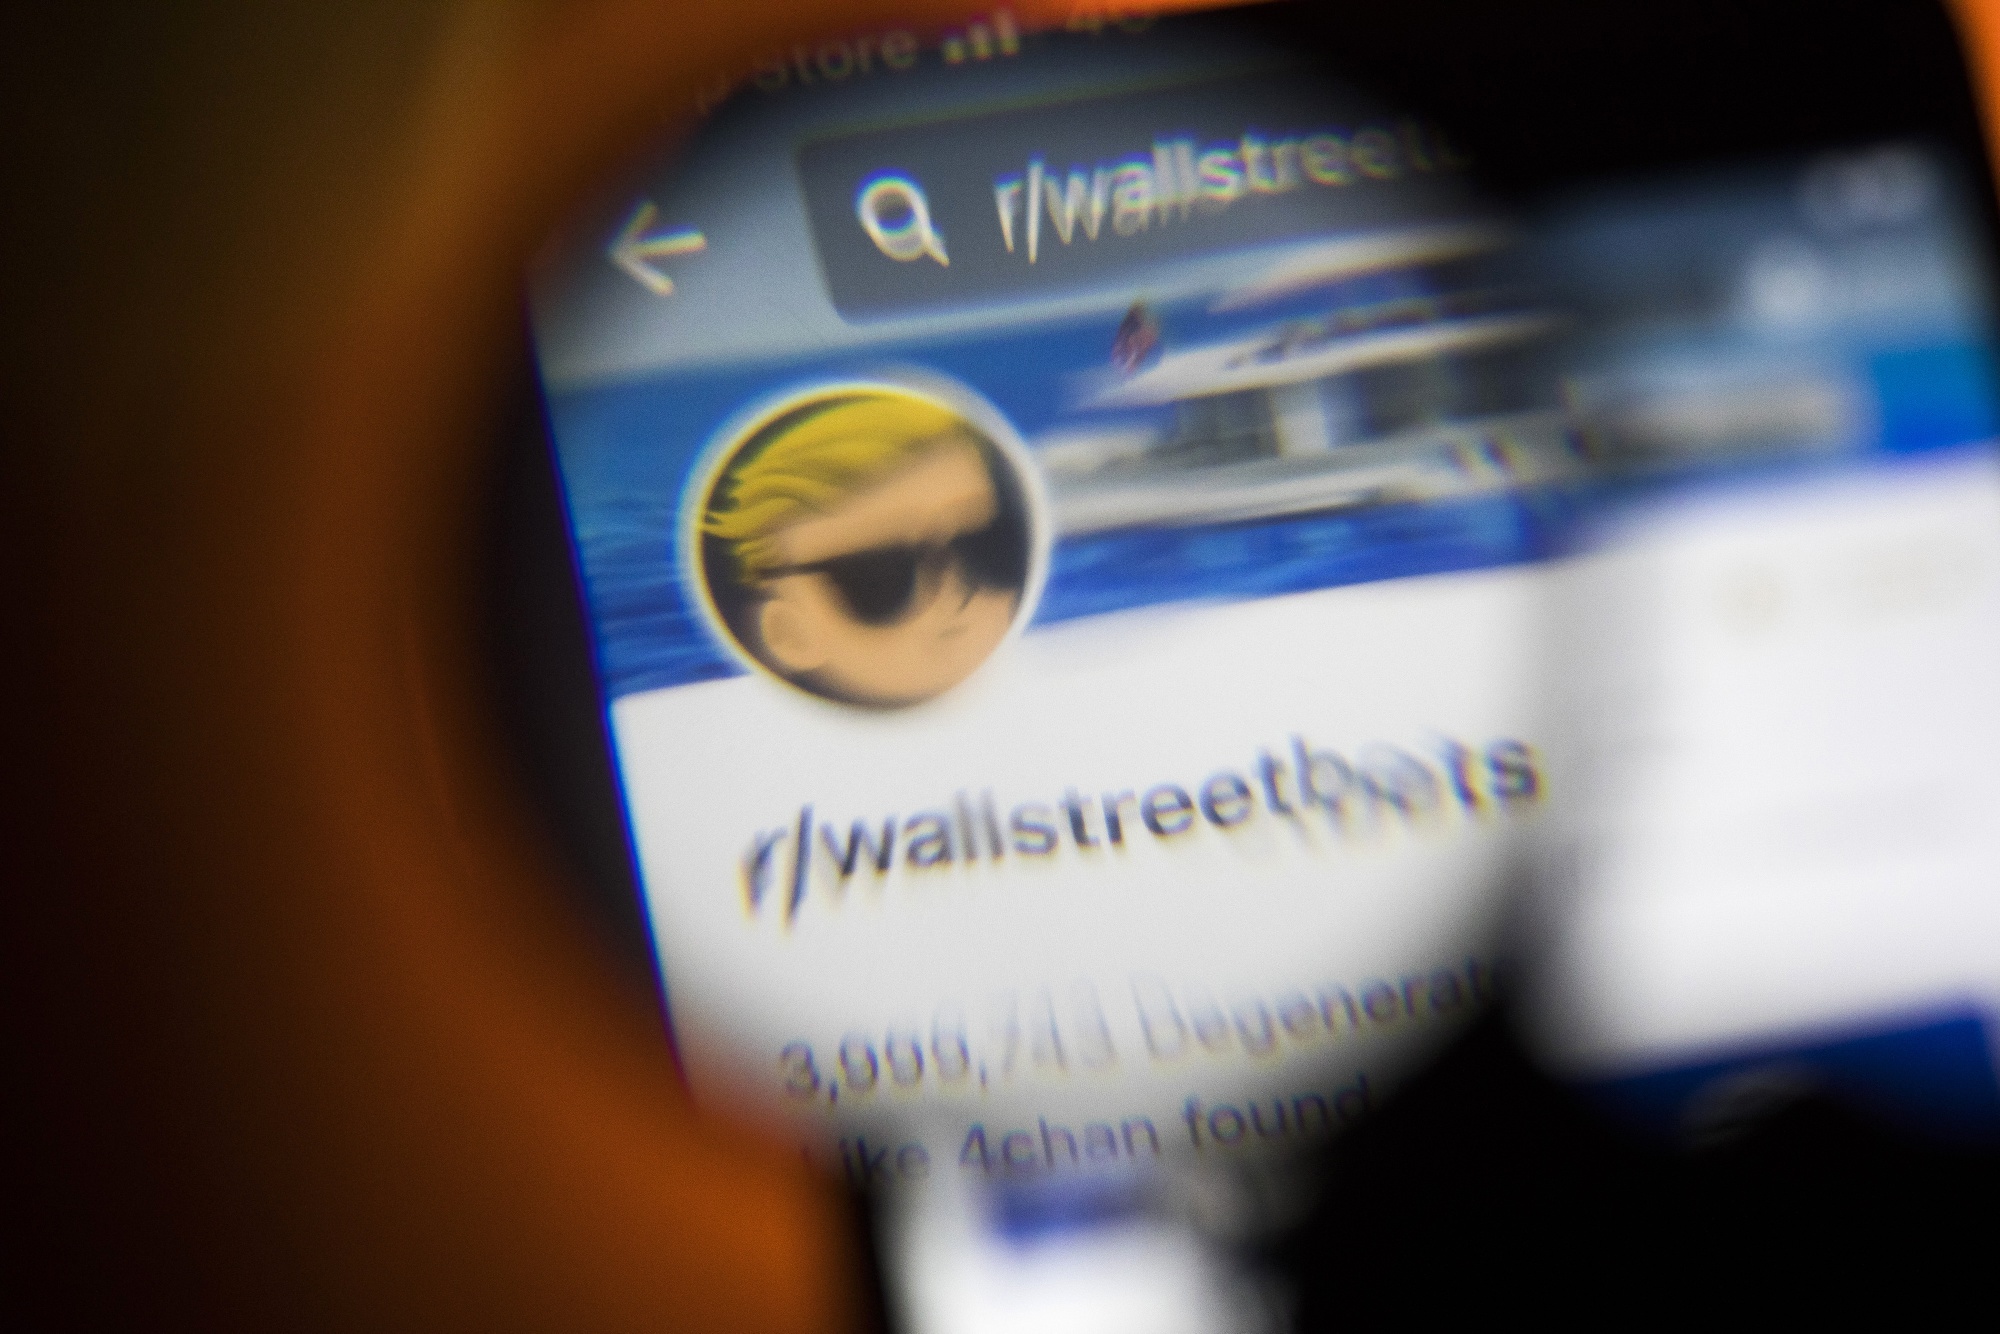 WallStreetBets Forum as Hedge Funds Lose Billions to Reddit Traders Running Amok